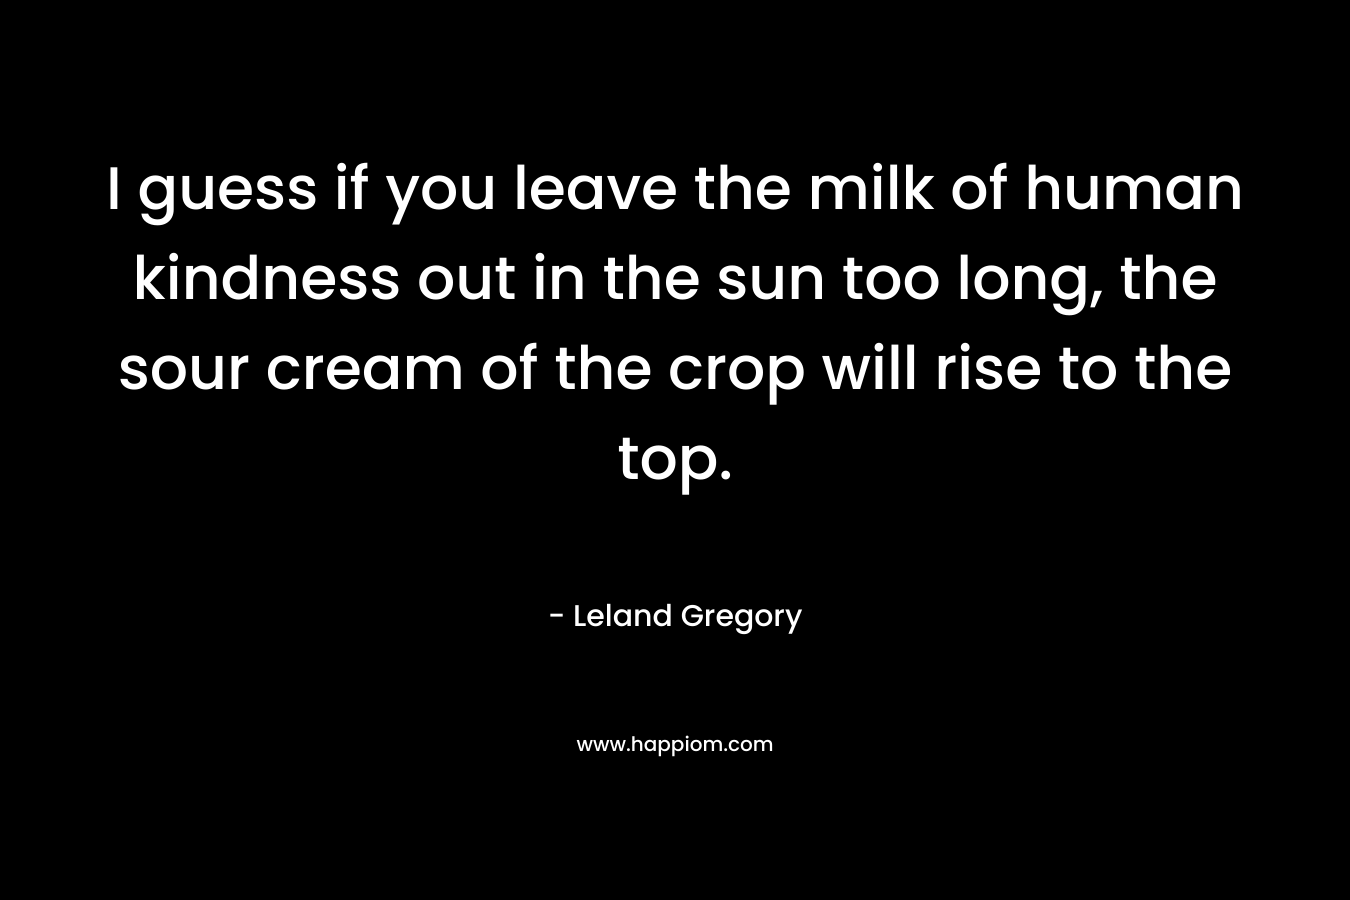 I guess if you leave the milk of human kindness out in the sun too long, the sour cream of the crop will rise to the top.